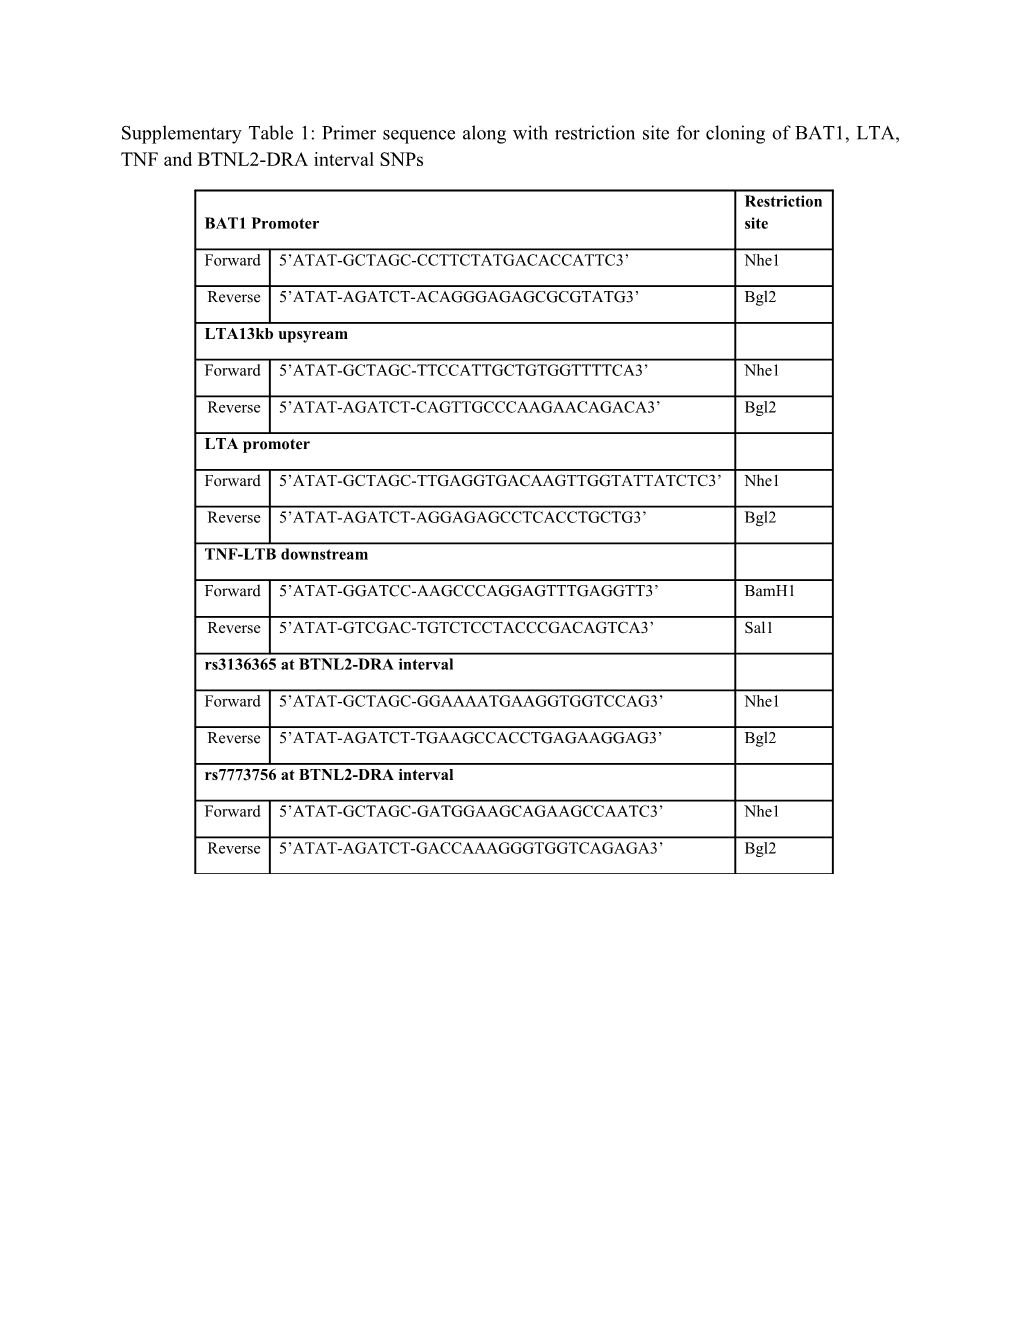 Supplementary Table 1: Primer Sequence Along with Restriction Site for Cloning of BAT1